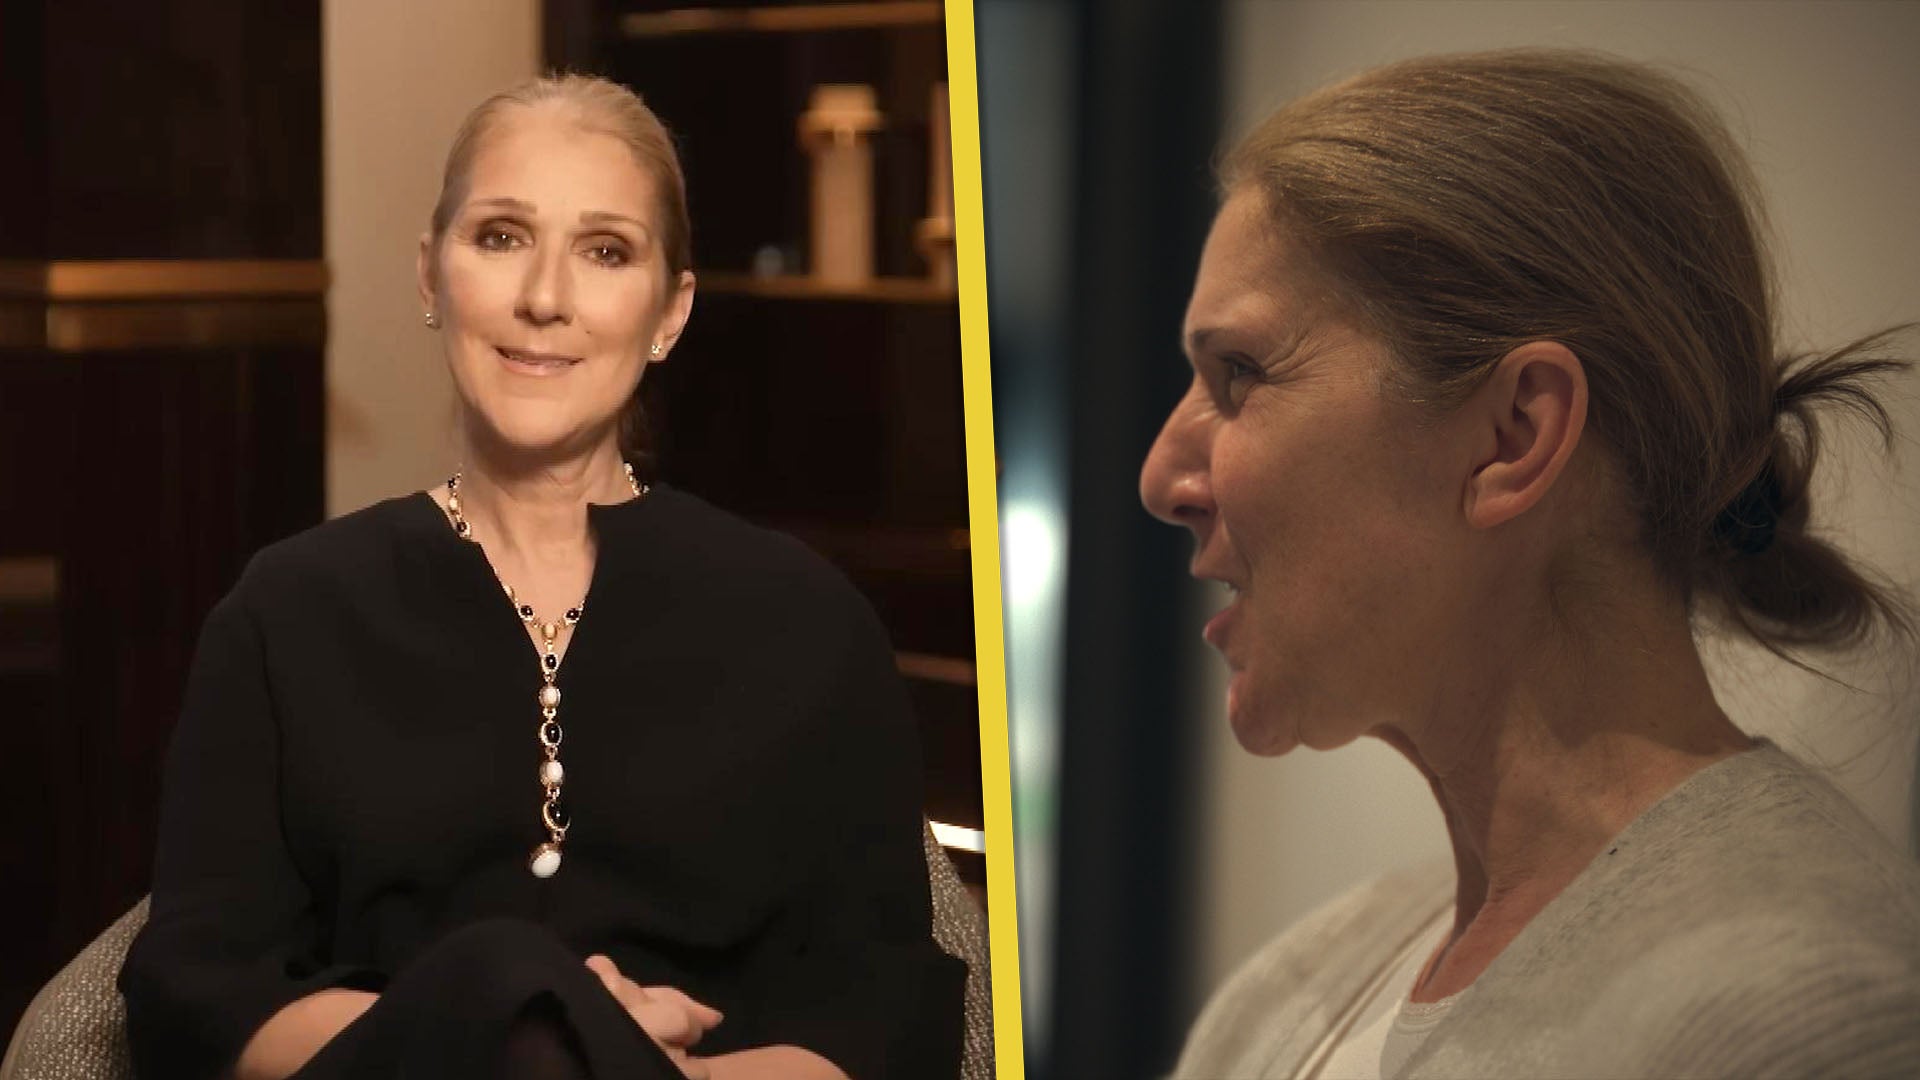 Celine Dion Shares First Look at ‘I Am: Celine Dion’ Documentary